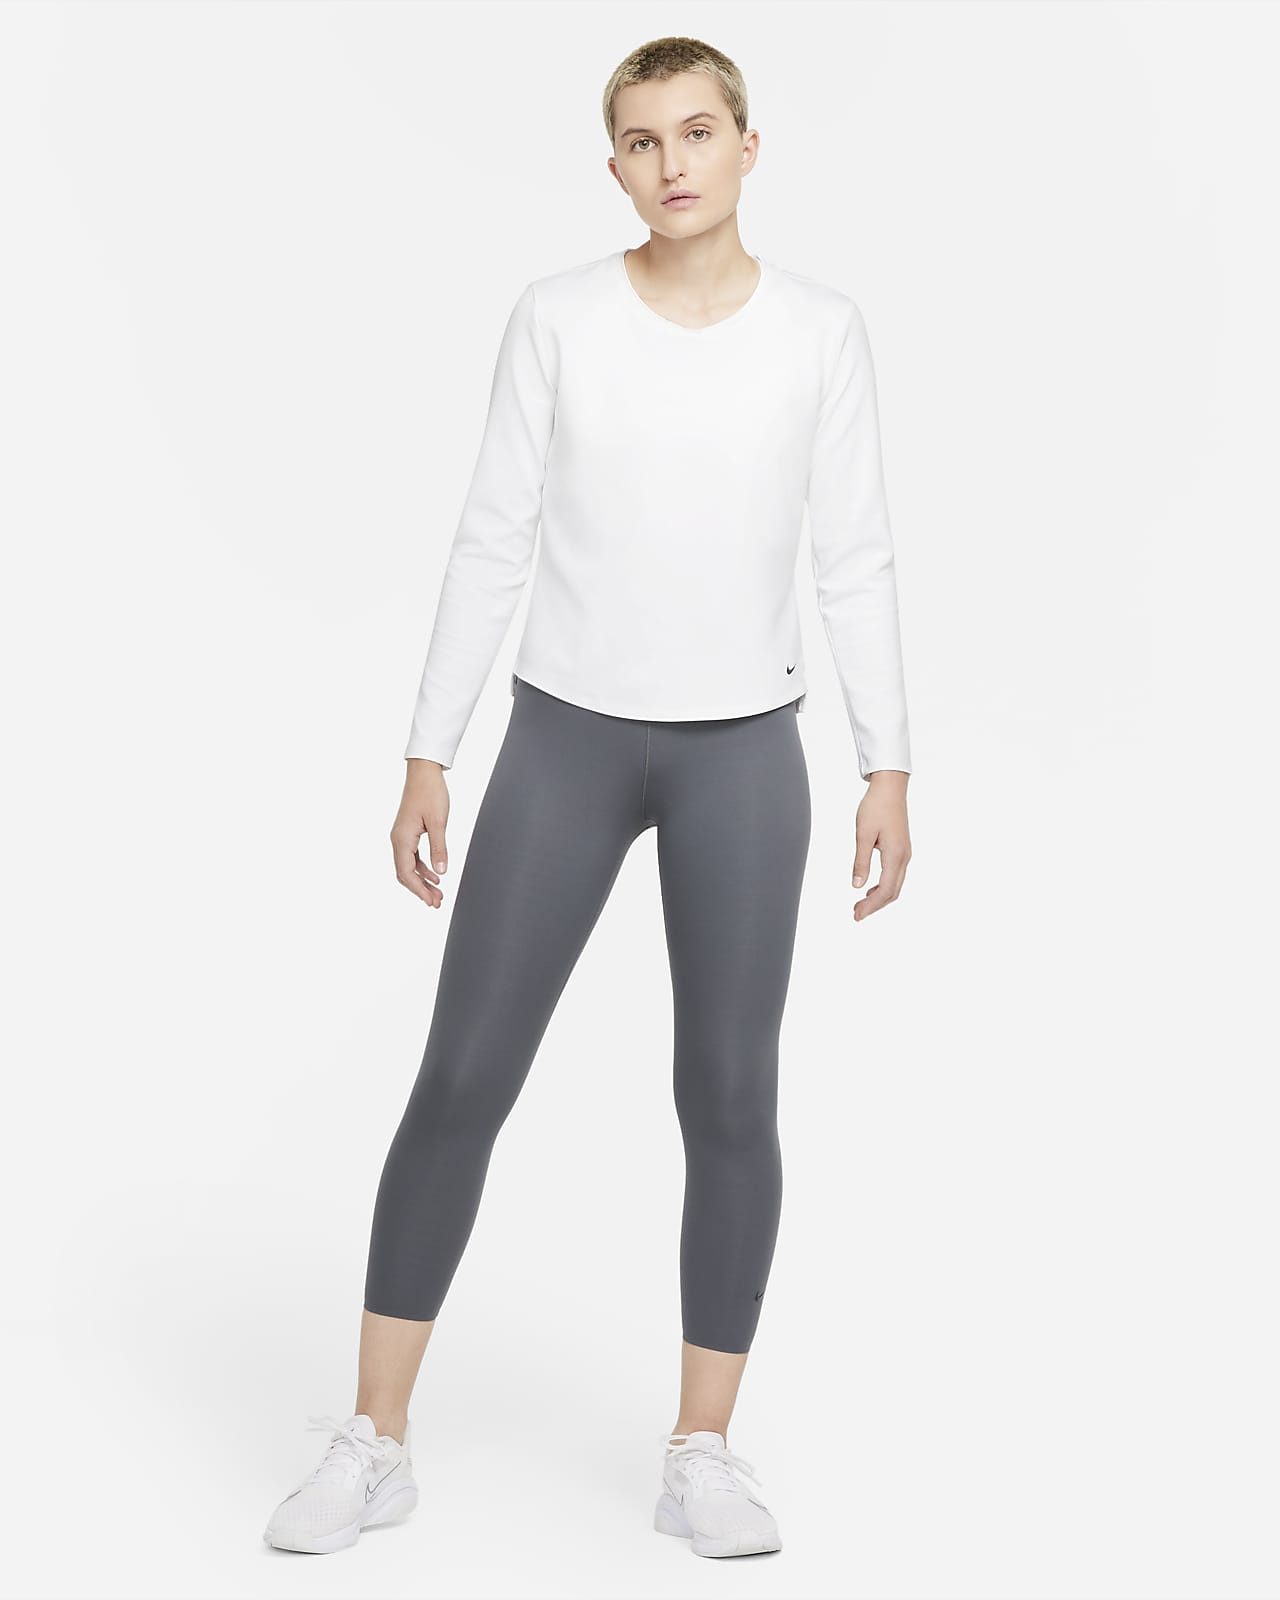 Nike Therma-FIT One Women's Long-Sleeve Top.